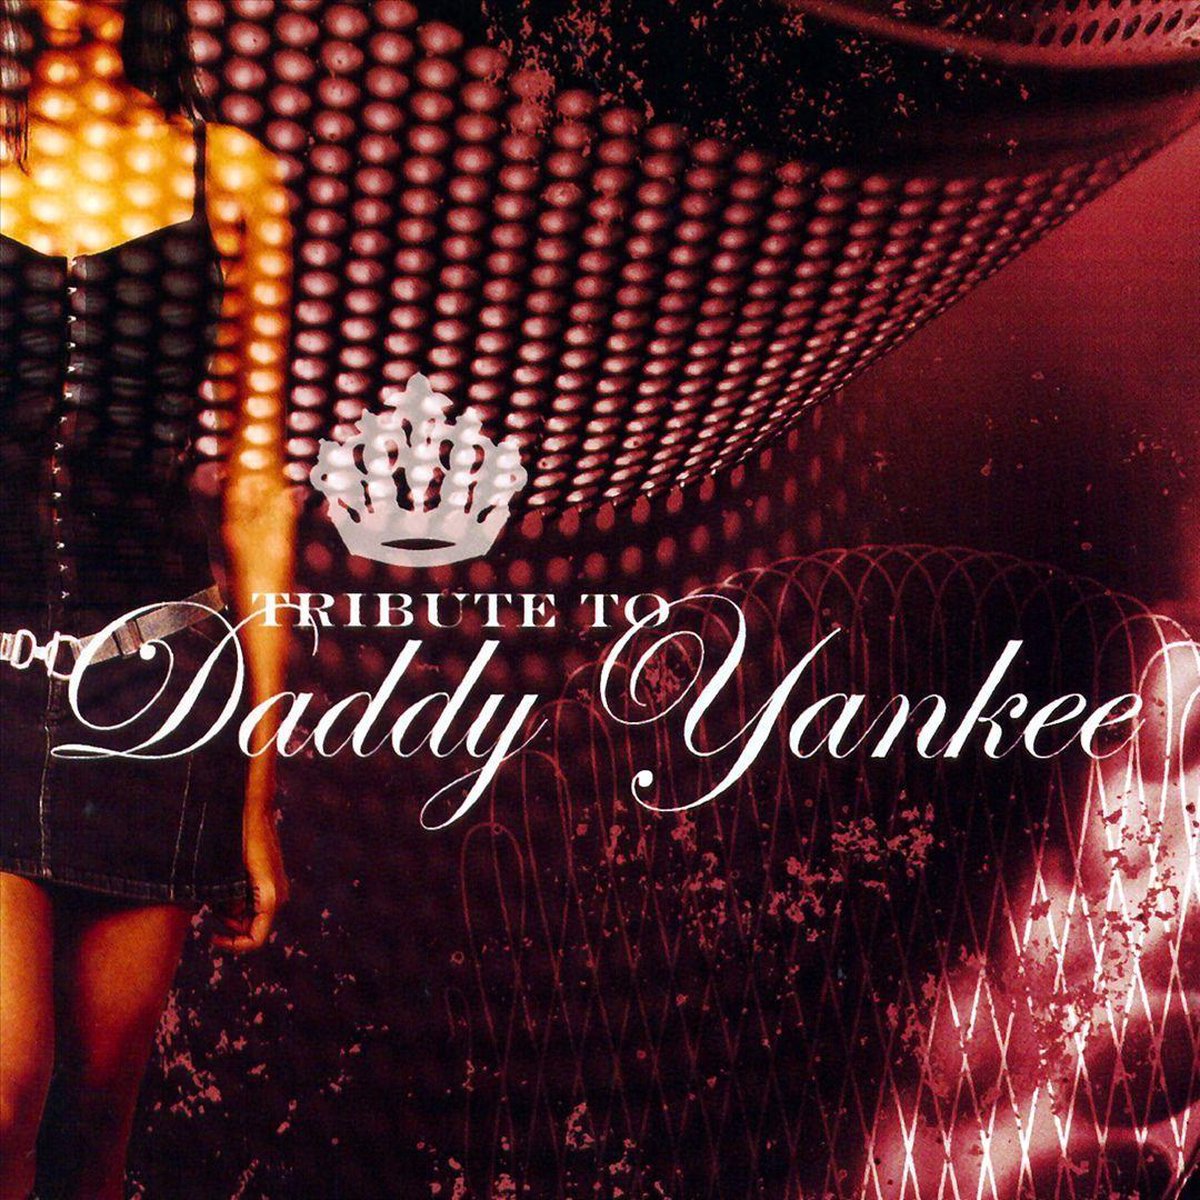 Tribute to Daddy Yankee - various artists